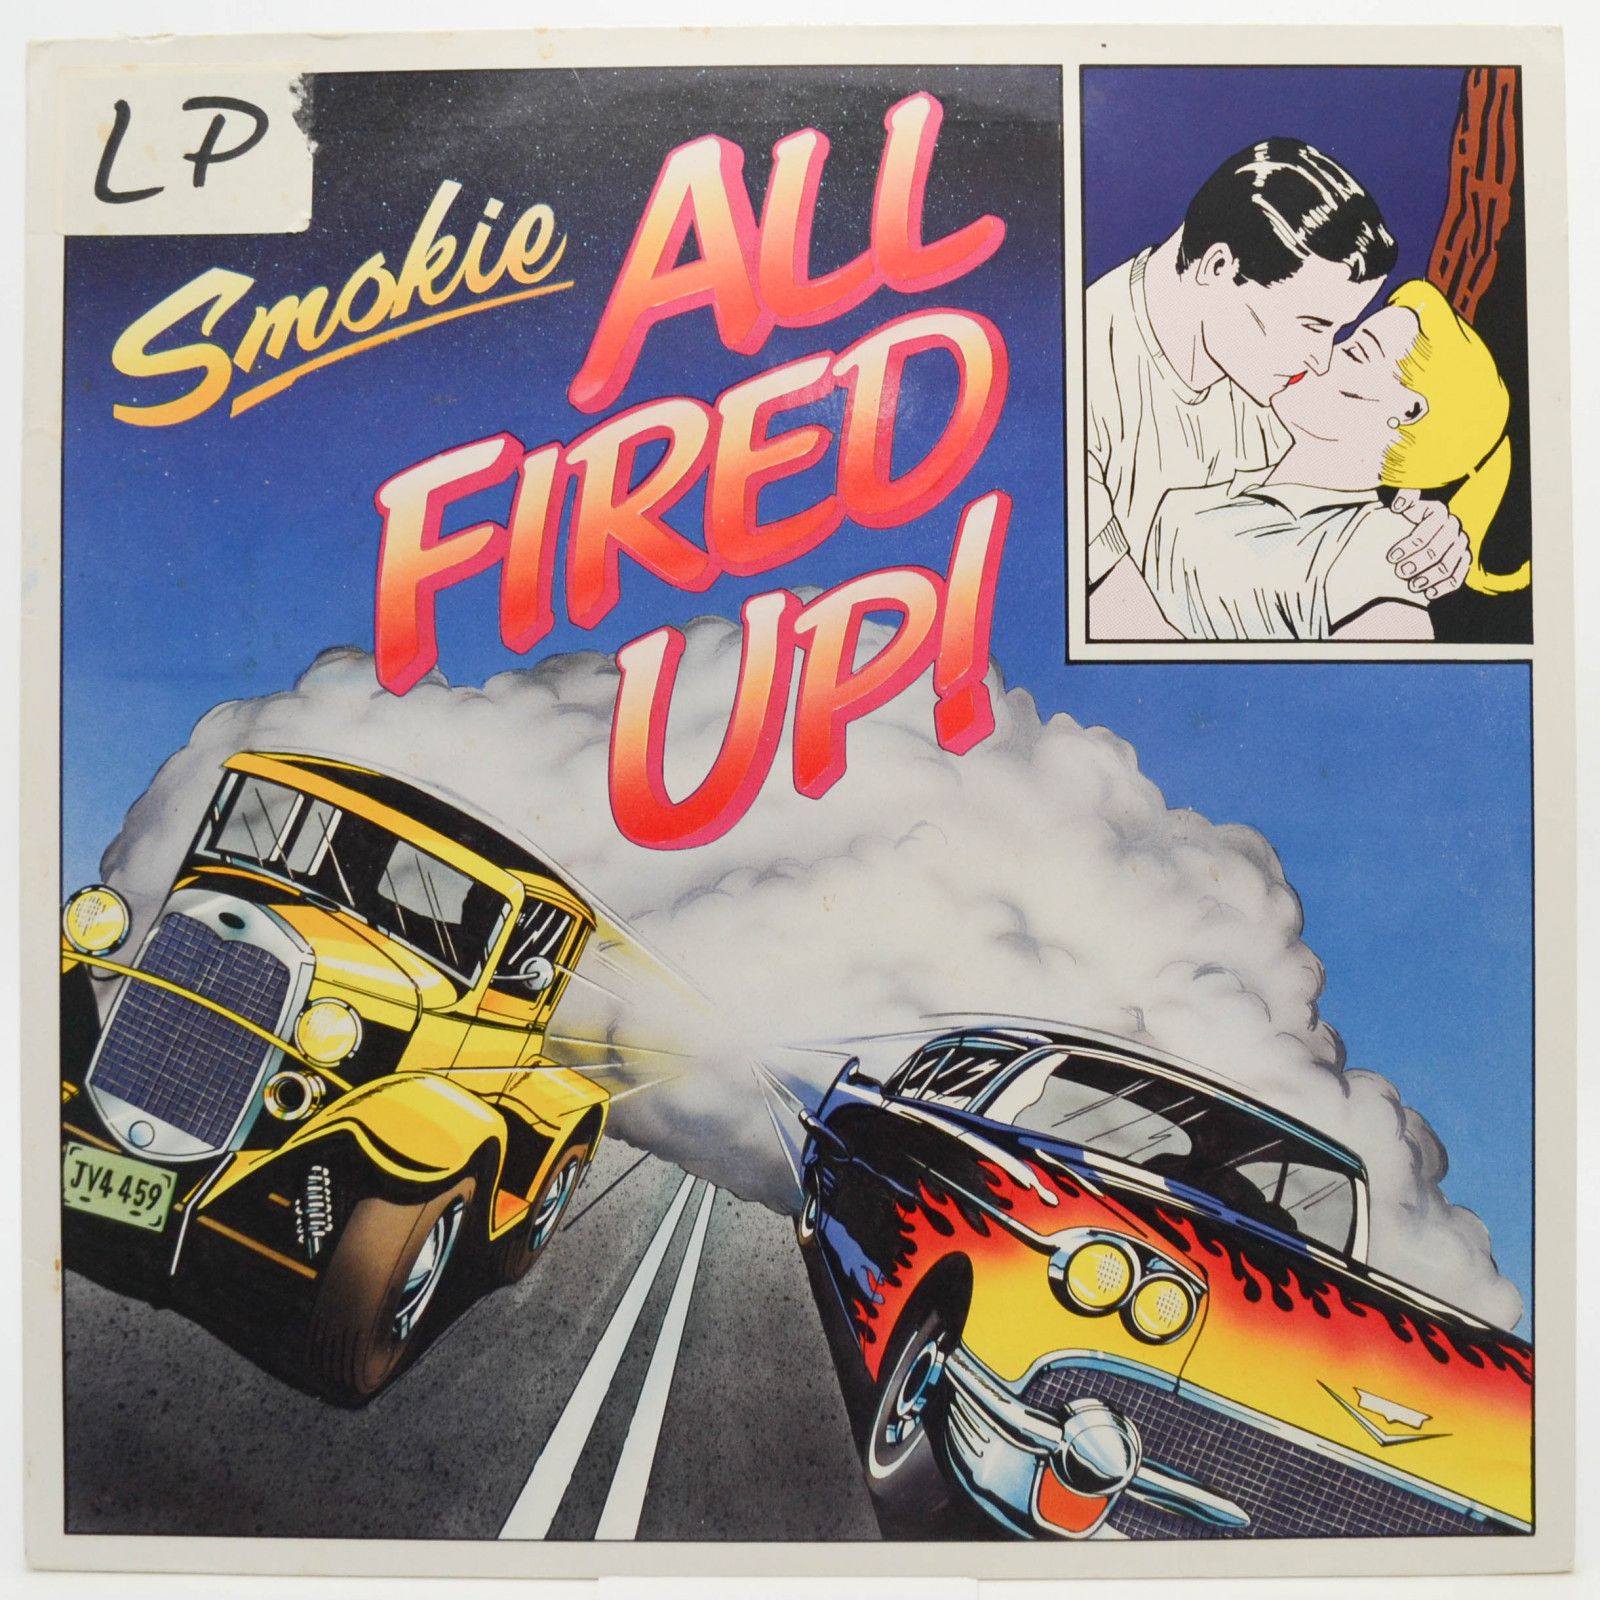 Smokie — All Fired Up, 1988